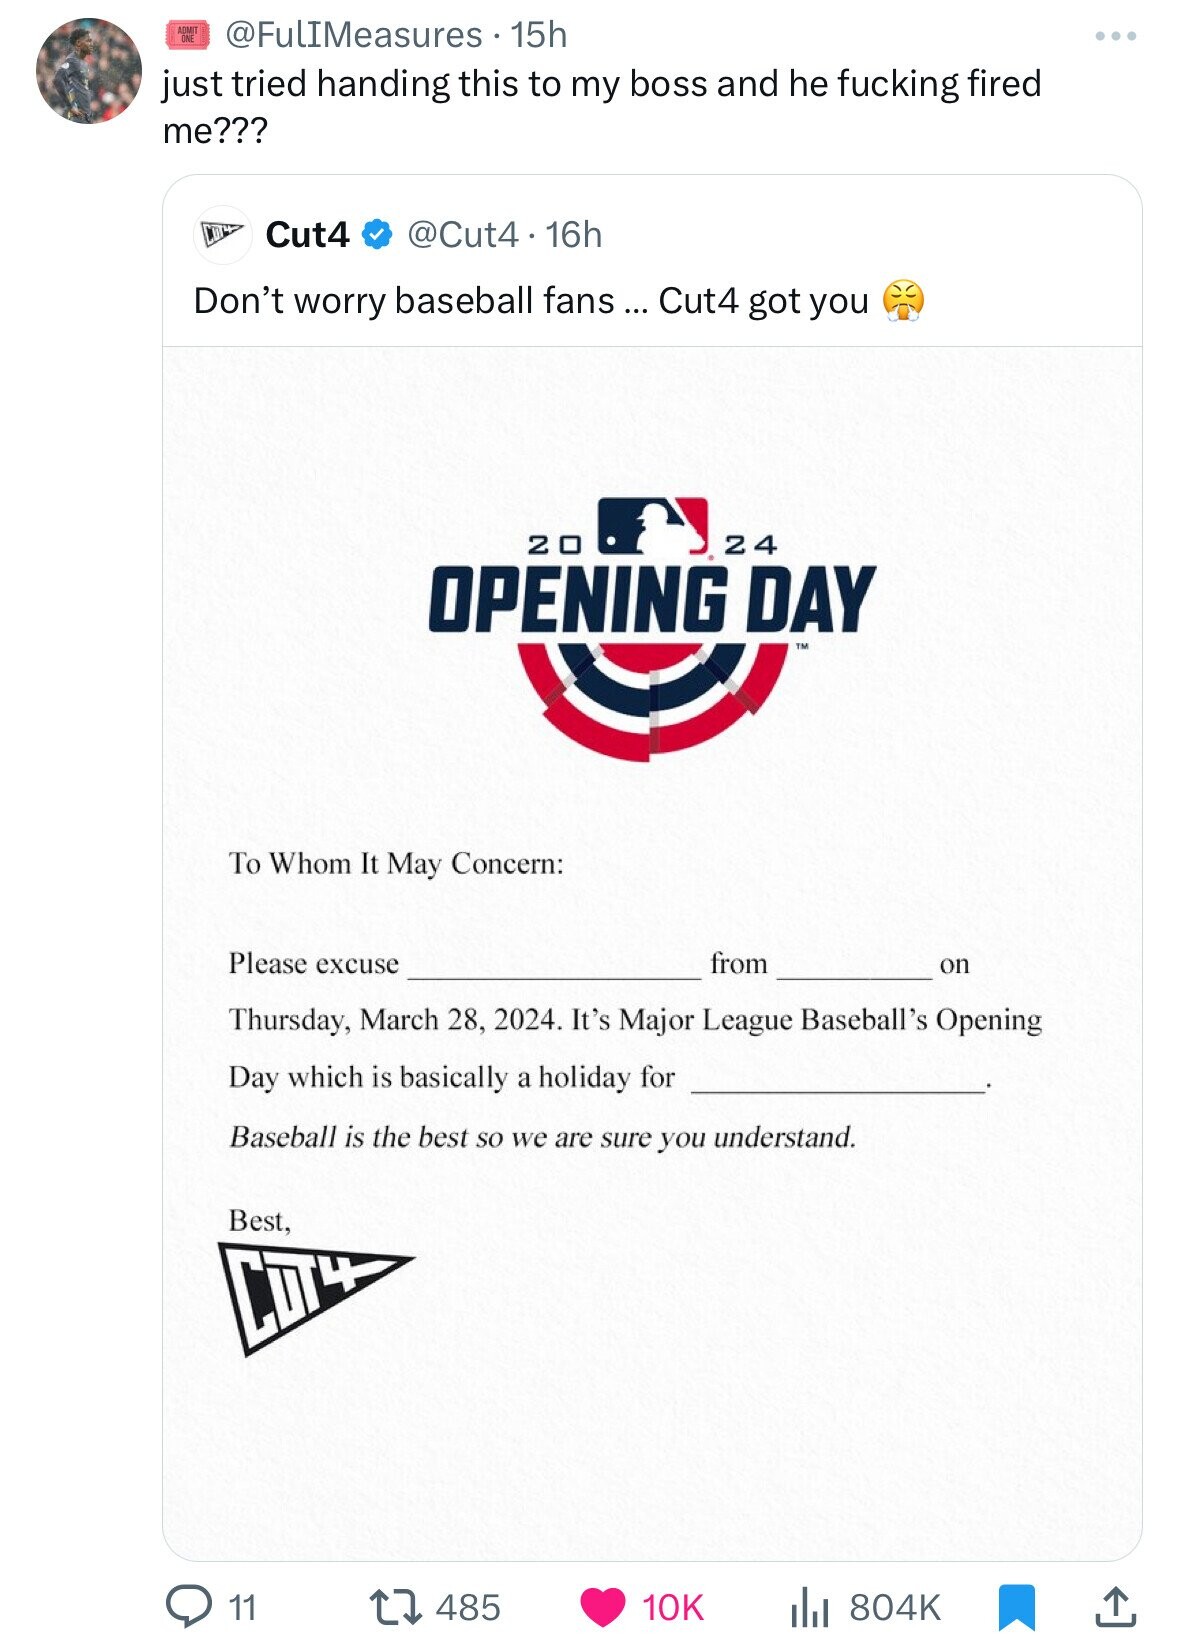 ADMIT ONE @FulIMeasures.15h just tried handing this to my boss and he fucking fired me??? Cut4 @Cut4.16h Don't worry baseball fans ... Cut4 got you 20 24 OPENING DAY TM To Whom It May Concern: Please excuse from on Thursday, March 28, 2024. It's Major League Baseball's Opening Day which is basically a holiday for Baseball is the best so we are sure you understand. Best, CUT4 11 485 10K 804K 